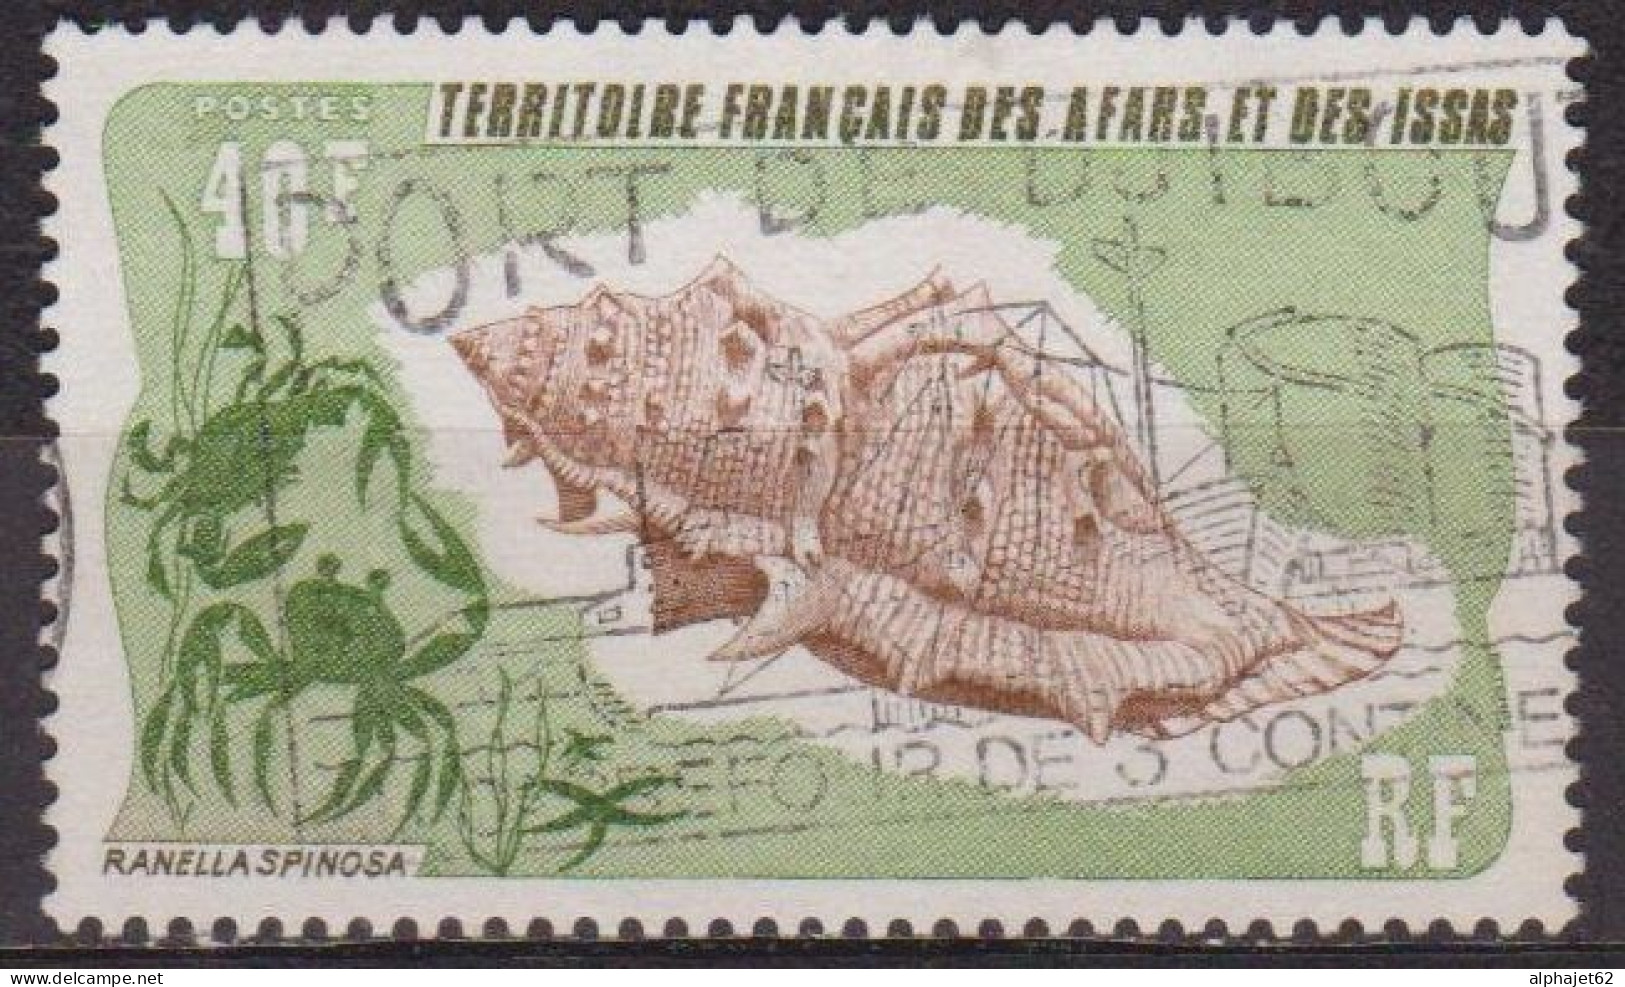 Faune Marine - AFARS ET ISSAS - Coquillage - Ranella Spinosa - N° 394 - 1975 - Used Stamps